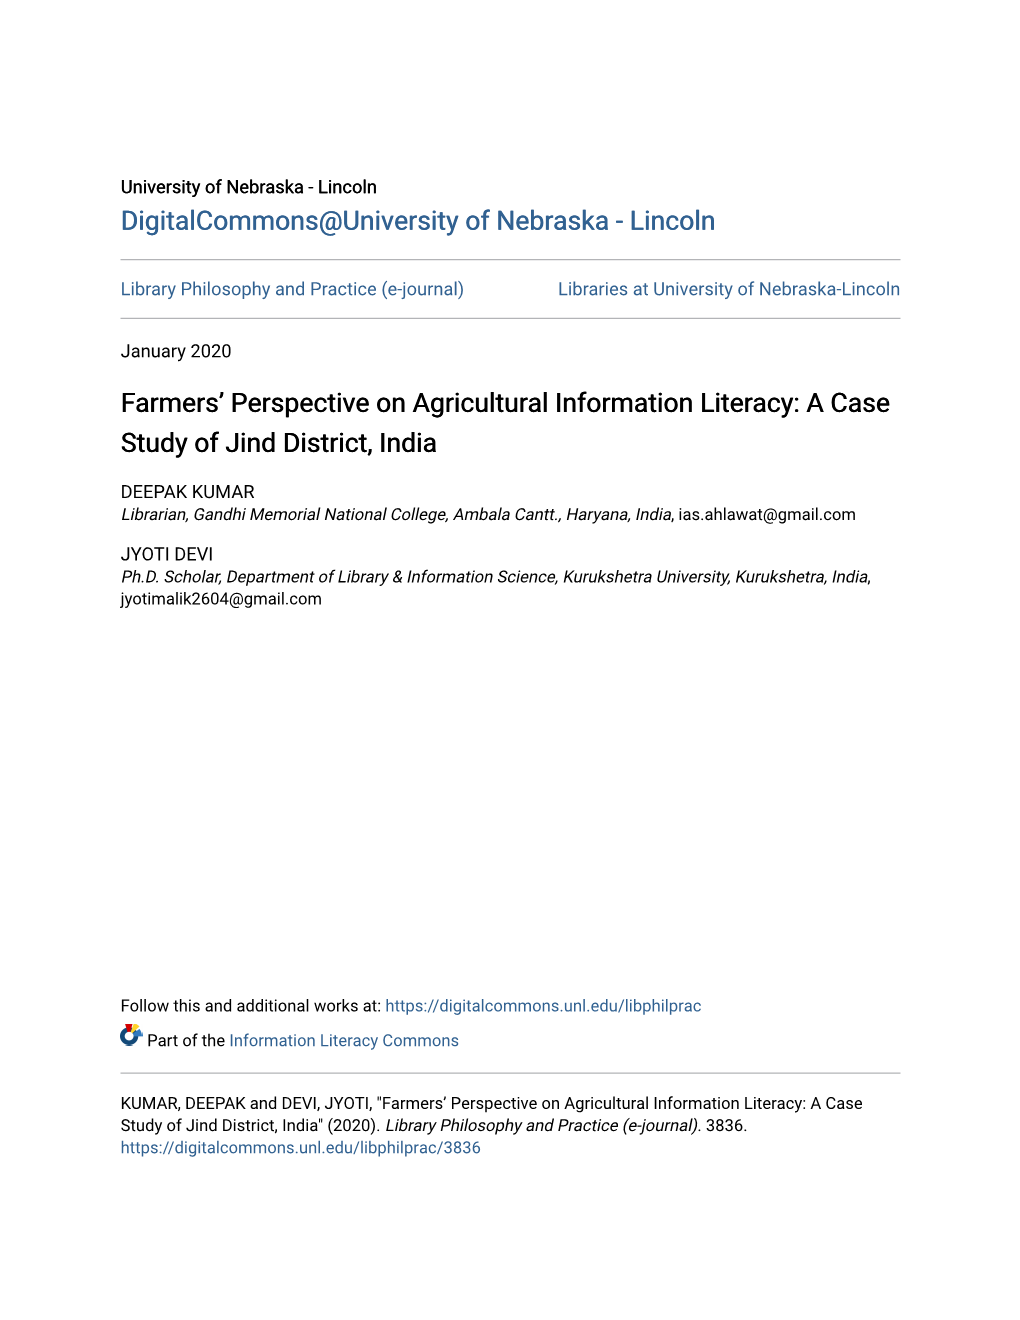 Farmers' Perspective on Agricultural Information Literacy: a Case Study of Jind District, India